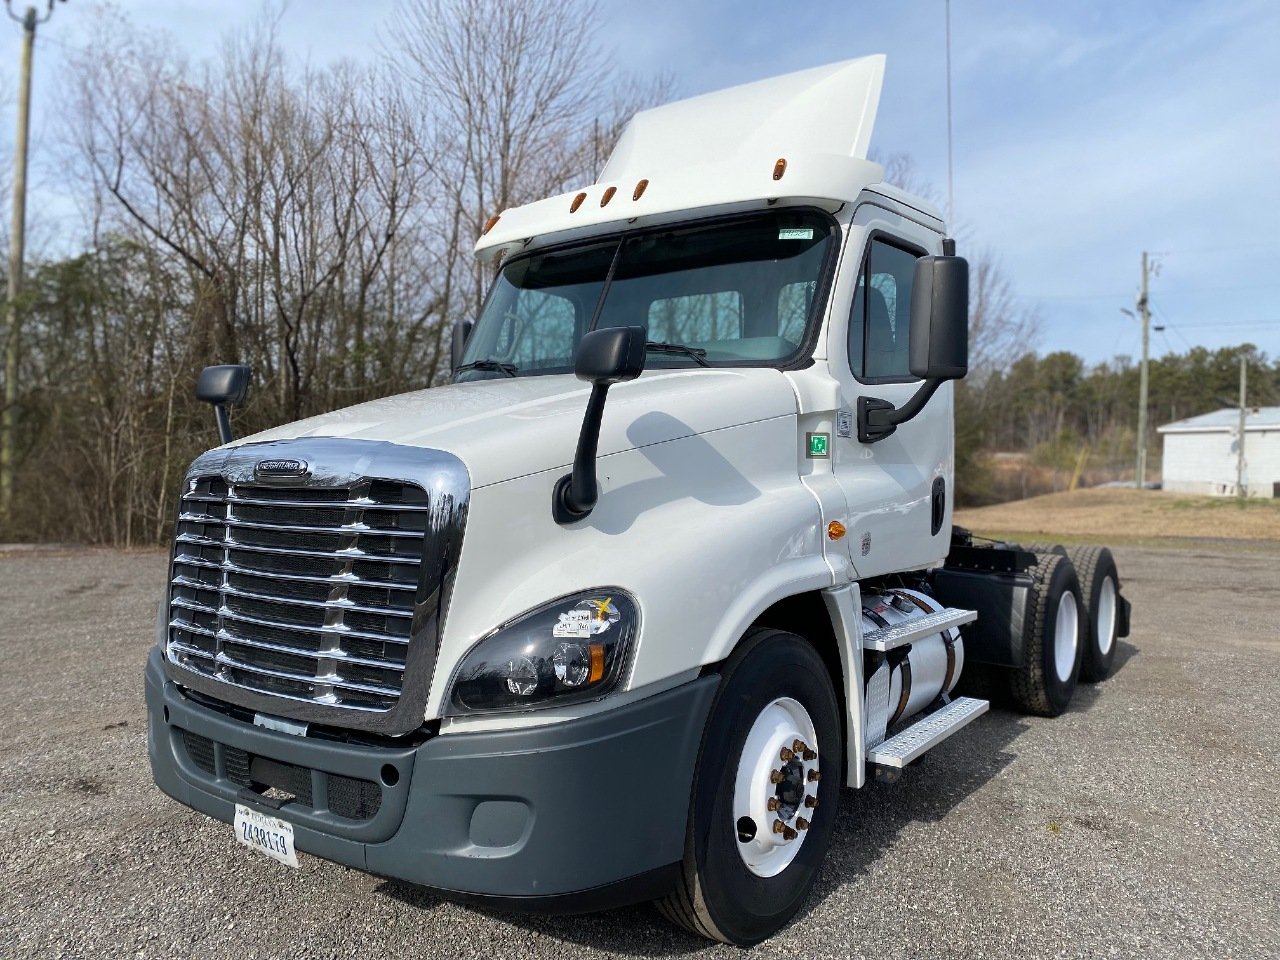 USED 2017 FREIGHTLINER CASCADIA TANDEM AXLE DAYCAB TRUCK #15167